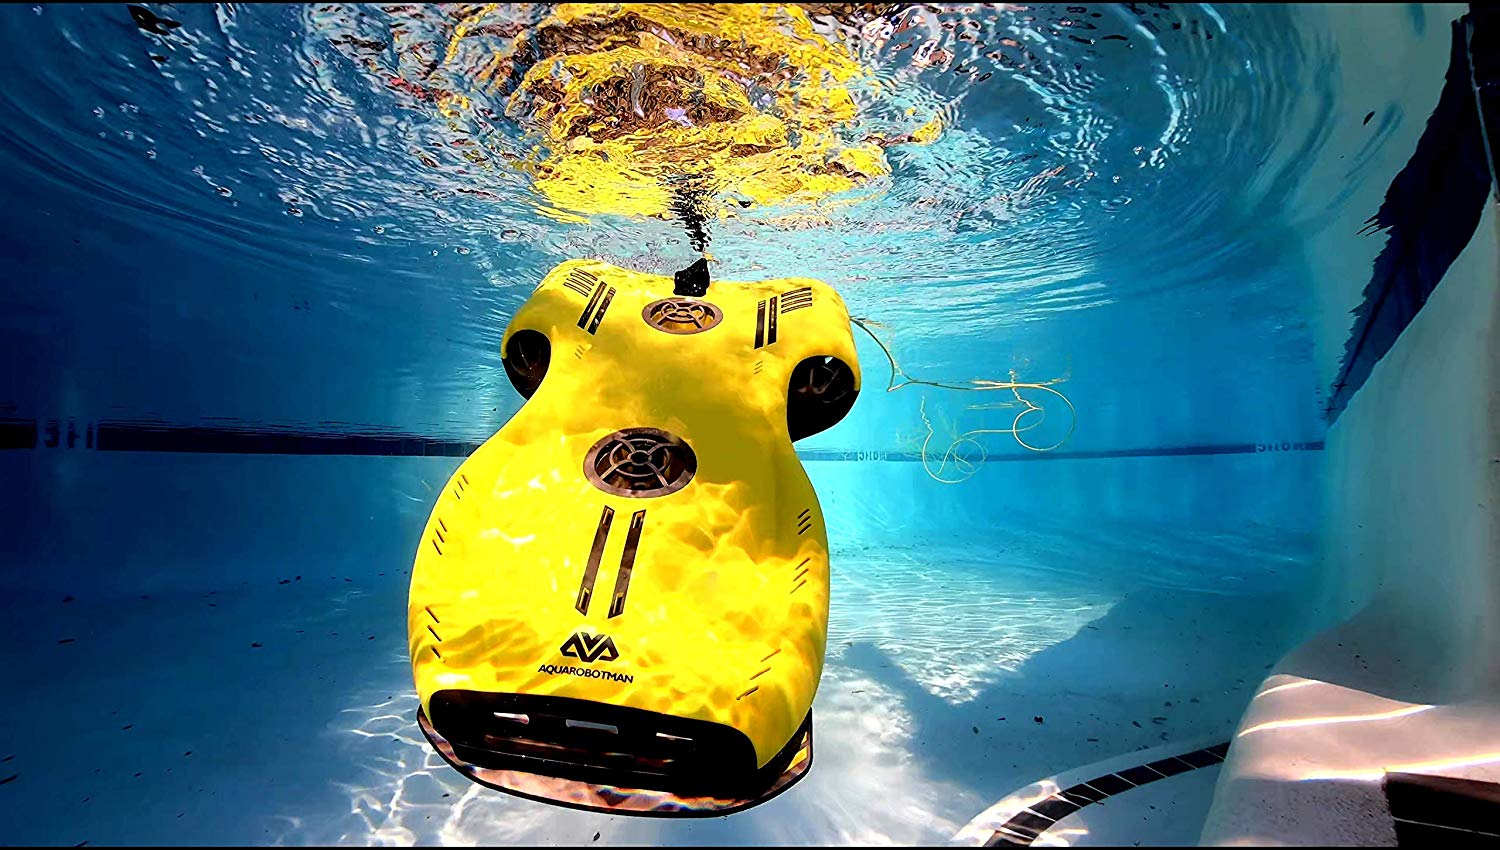 Nemo Underwater Drone with 4K UHD Camera and LED Fill Light